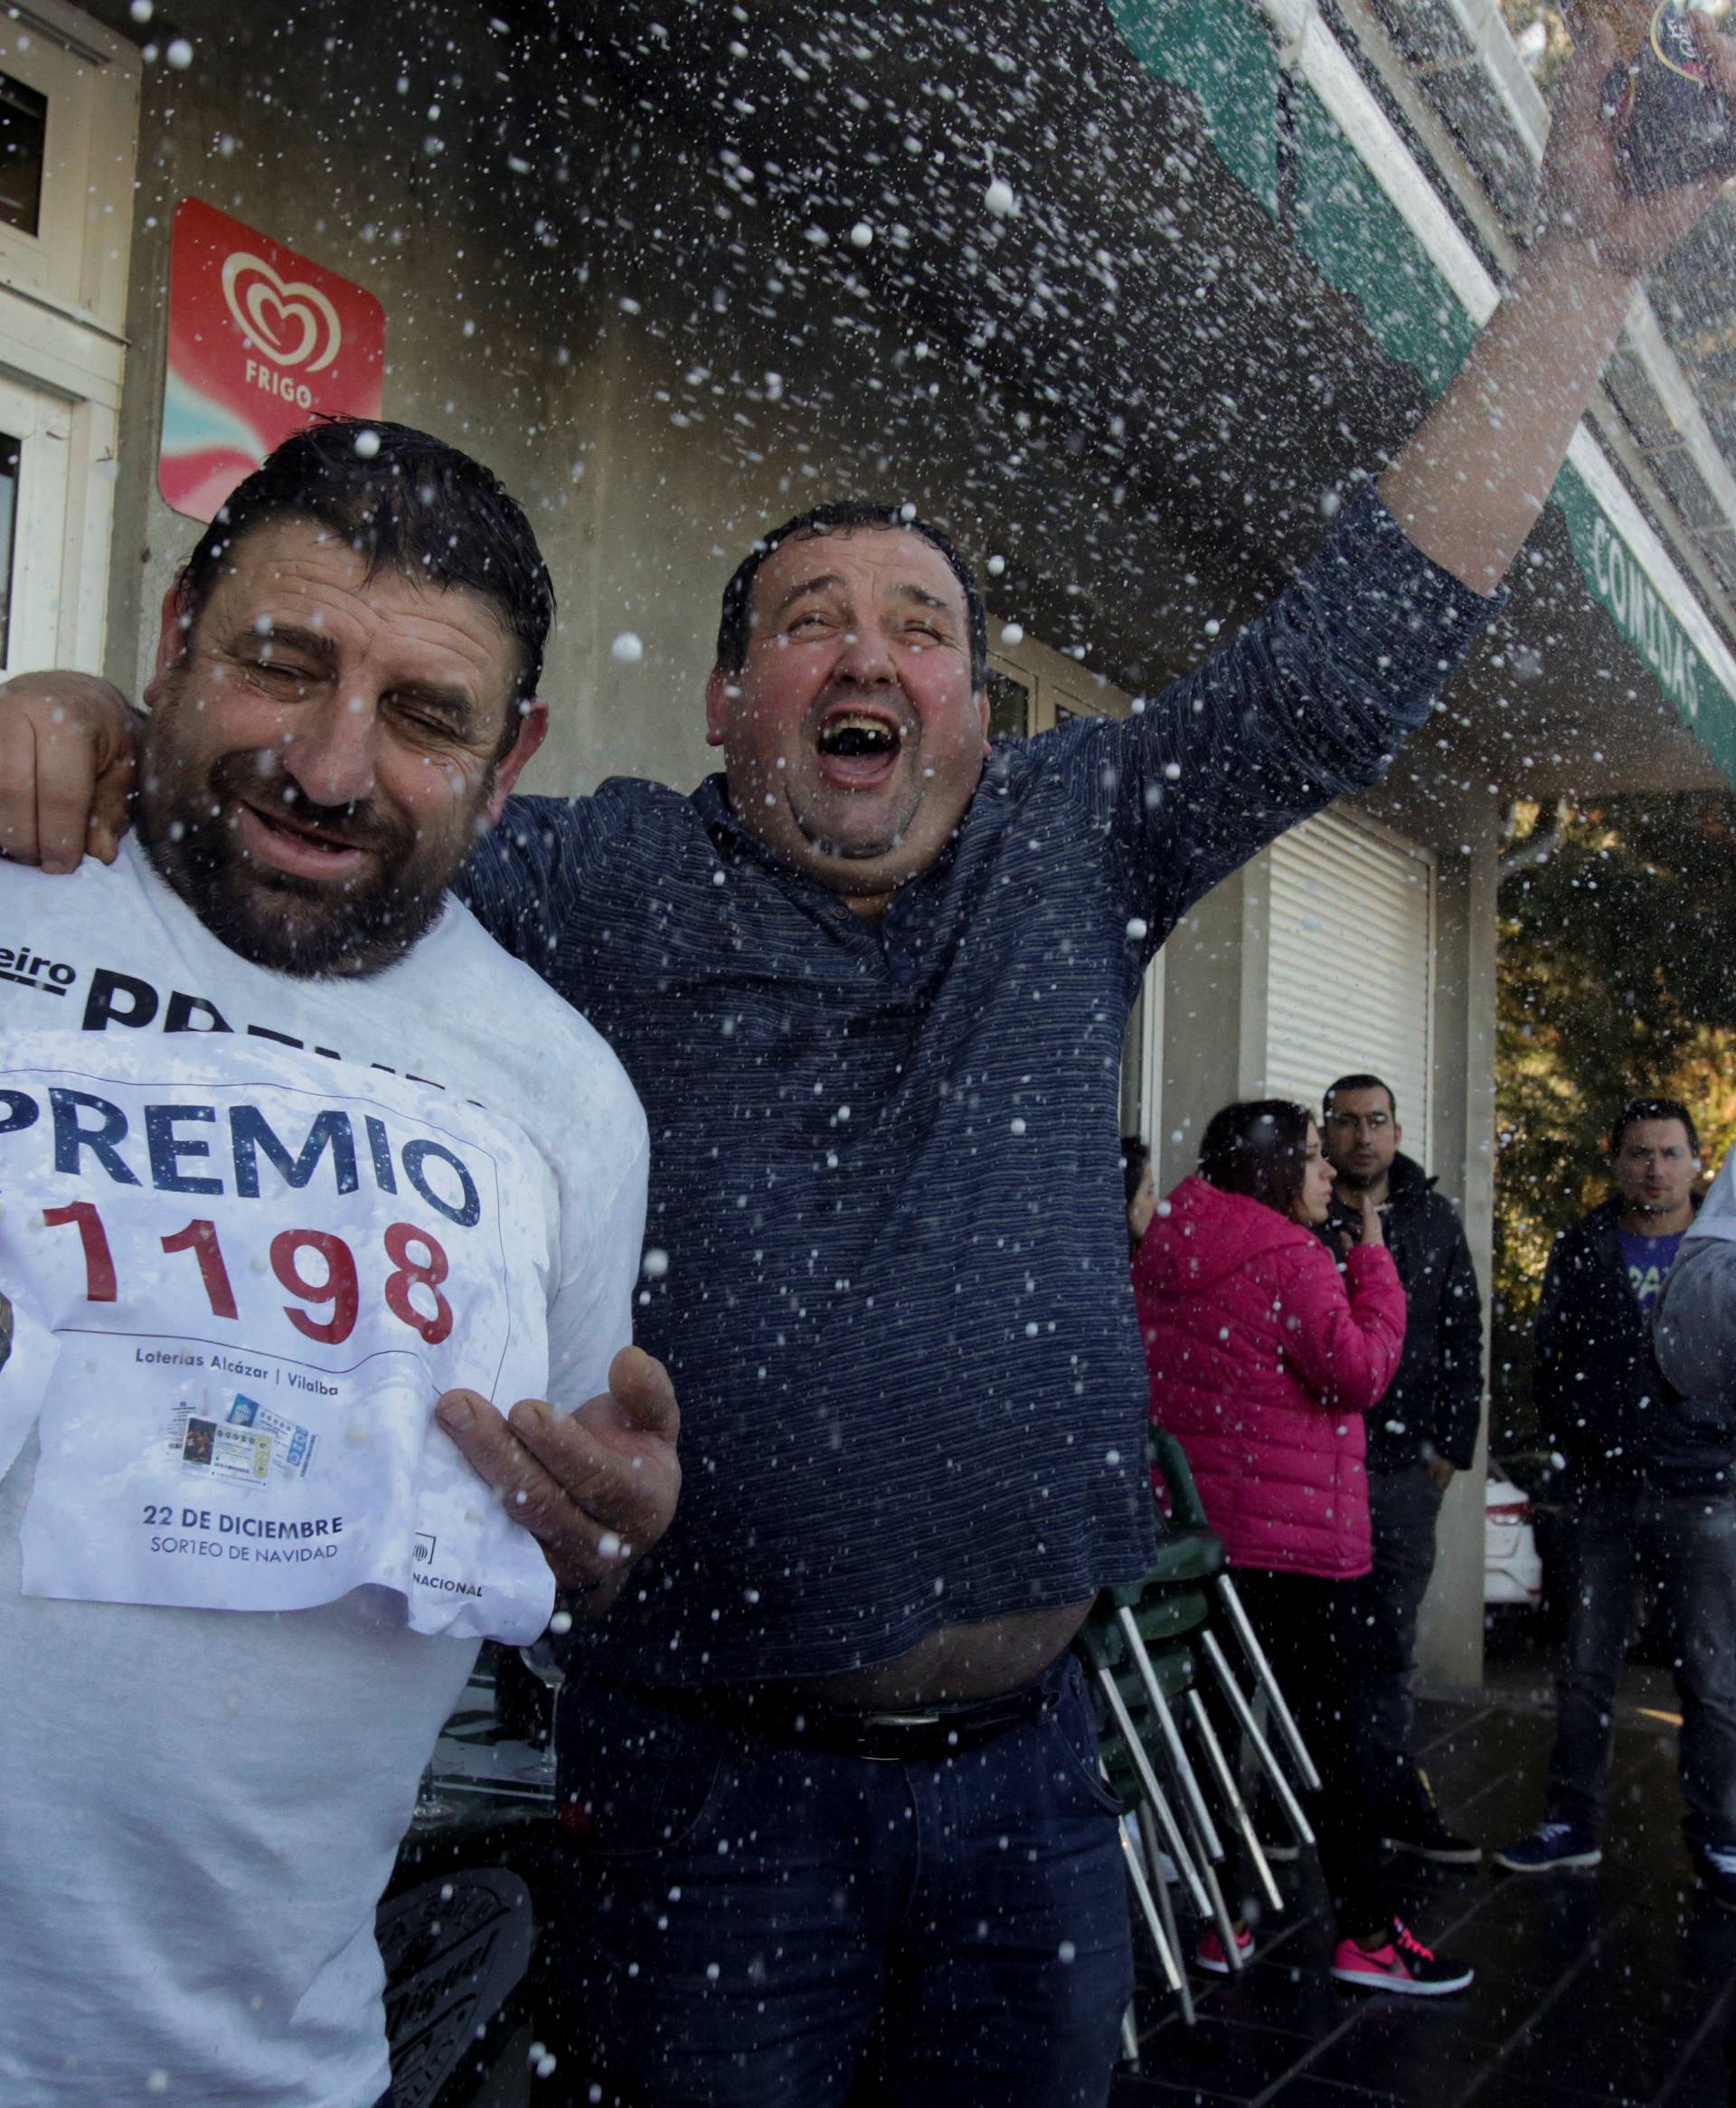 People, who bought winning tickets of the biggest prize of Spain's Christmas Lottery "El Gordo" (The Fat One), celebrate in Vilalba